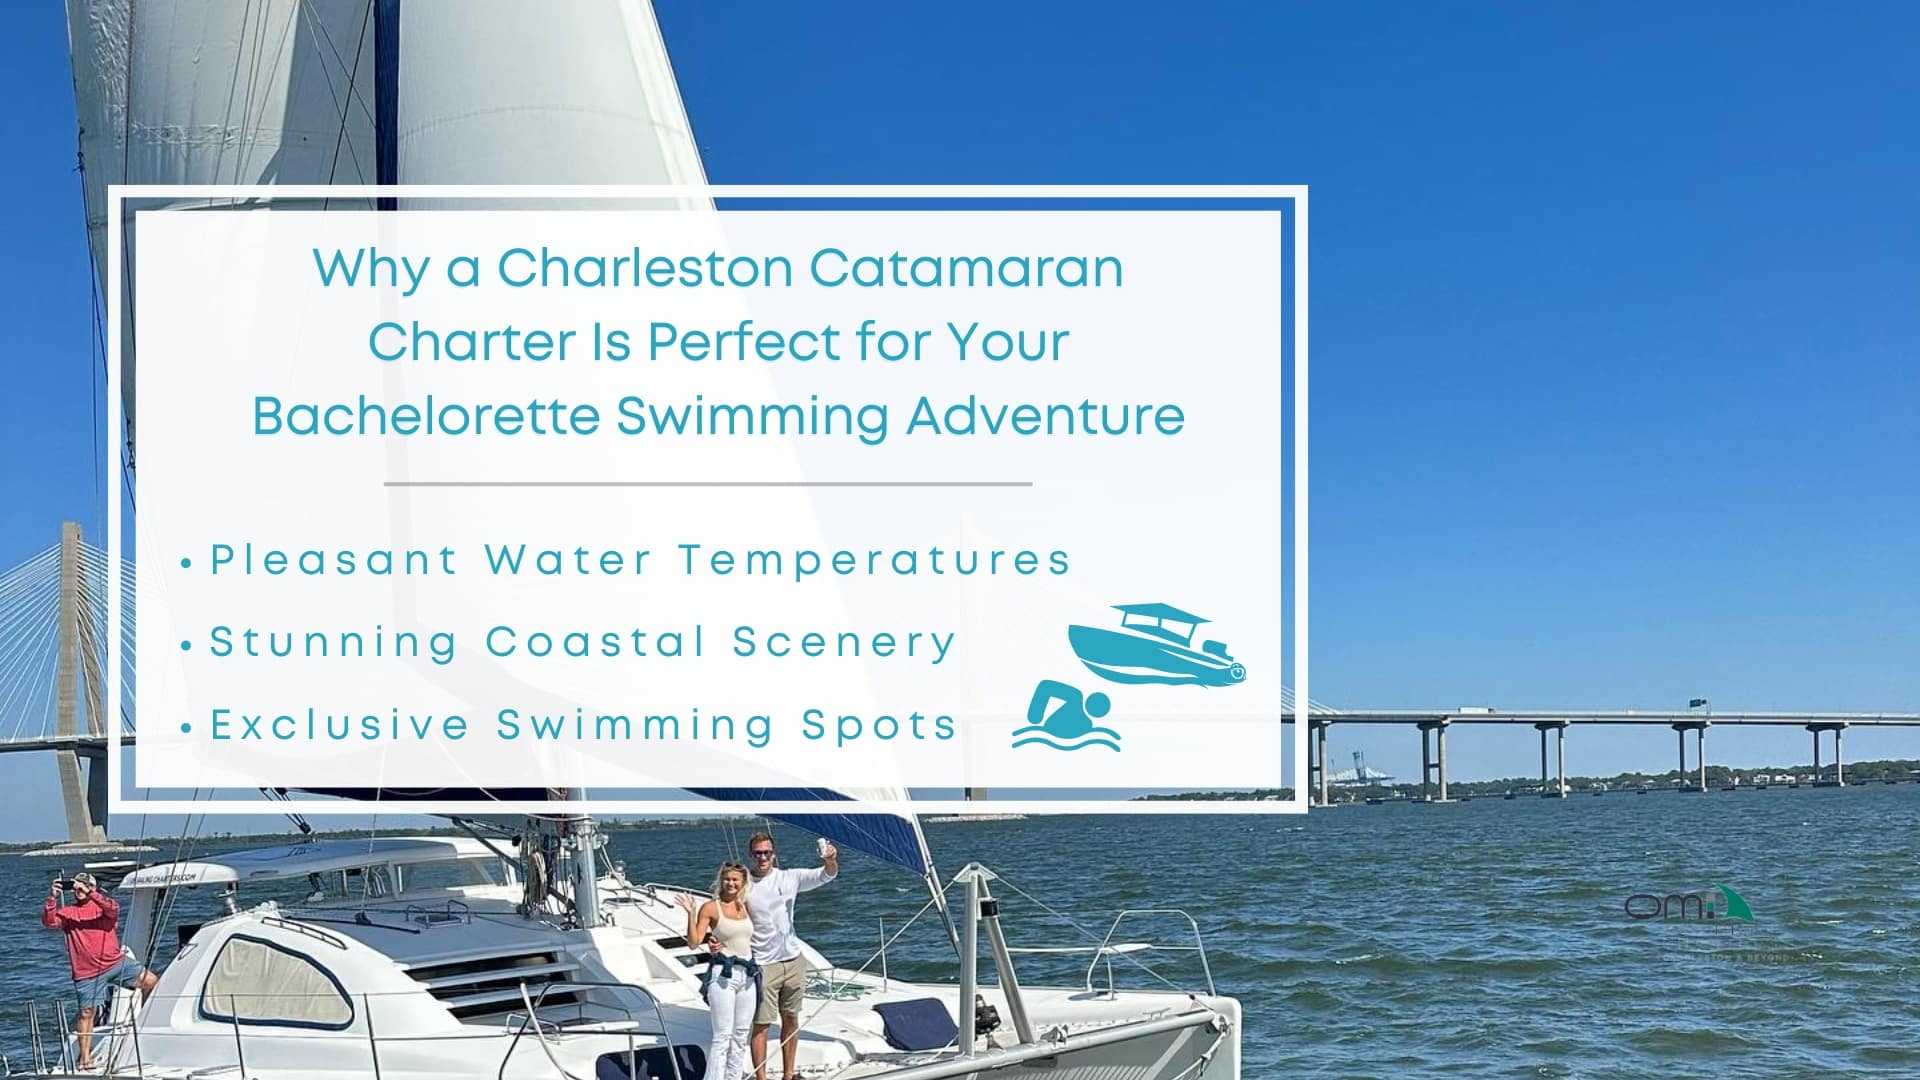 nfographic image of why a Charleston catamaran charter is perfect for your bachelorette swimming adventure